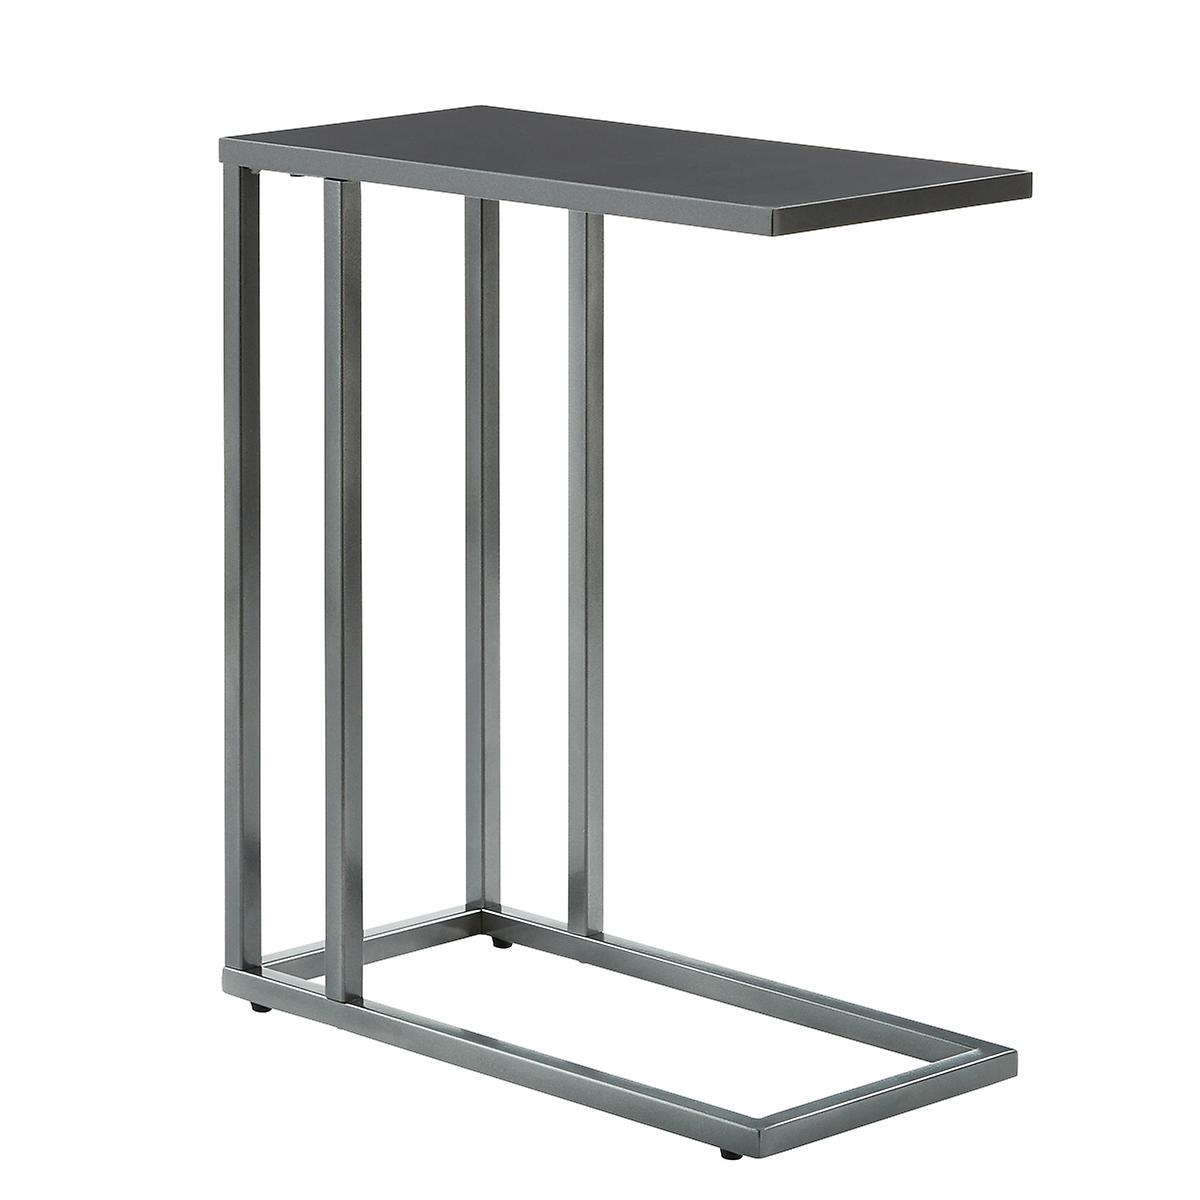 Anthracite C Table The Container Store